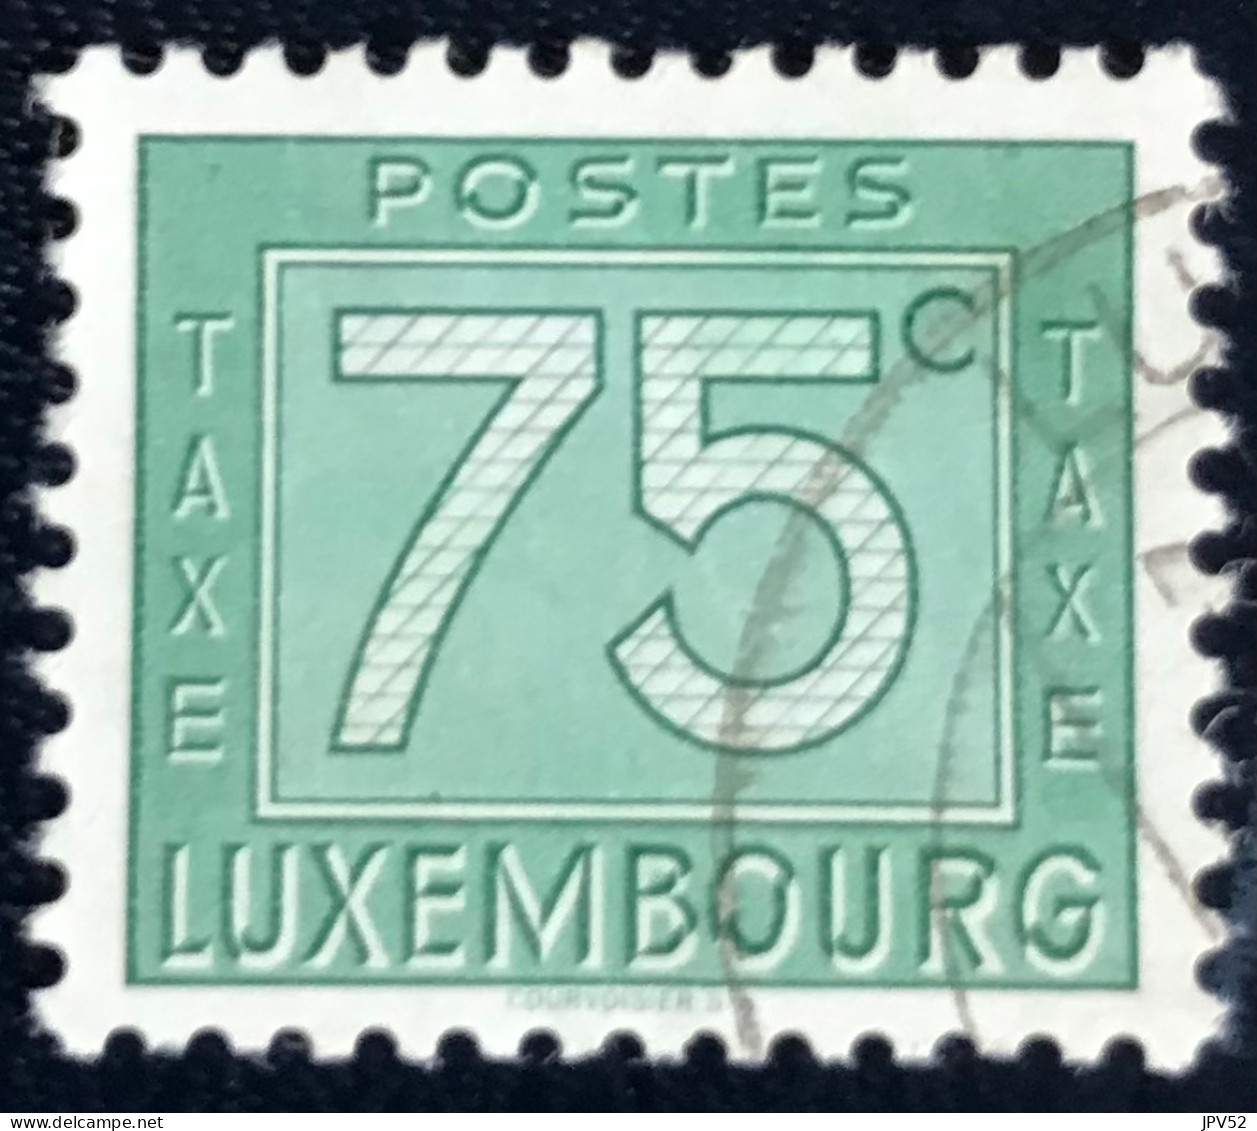 Luxembourg - Luxemburg - C18/33 - 1946 - (°)used - Michel 29 - Strafport - Cijfer - Taxes